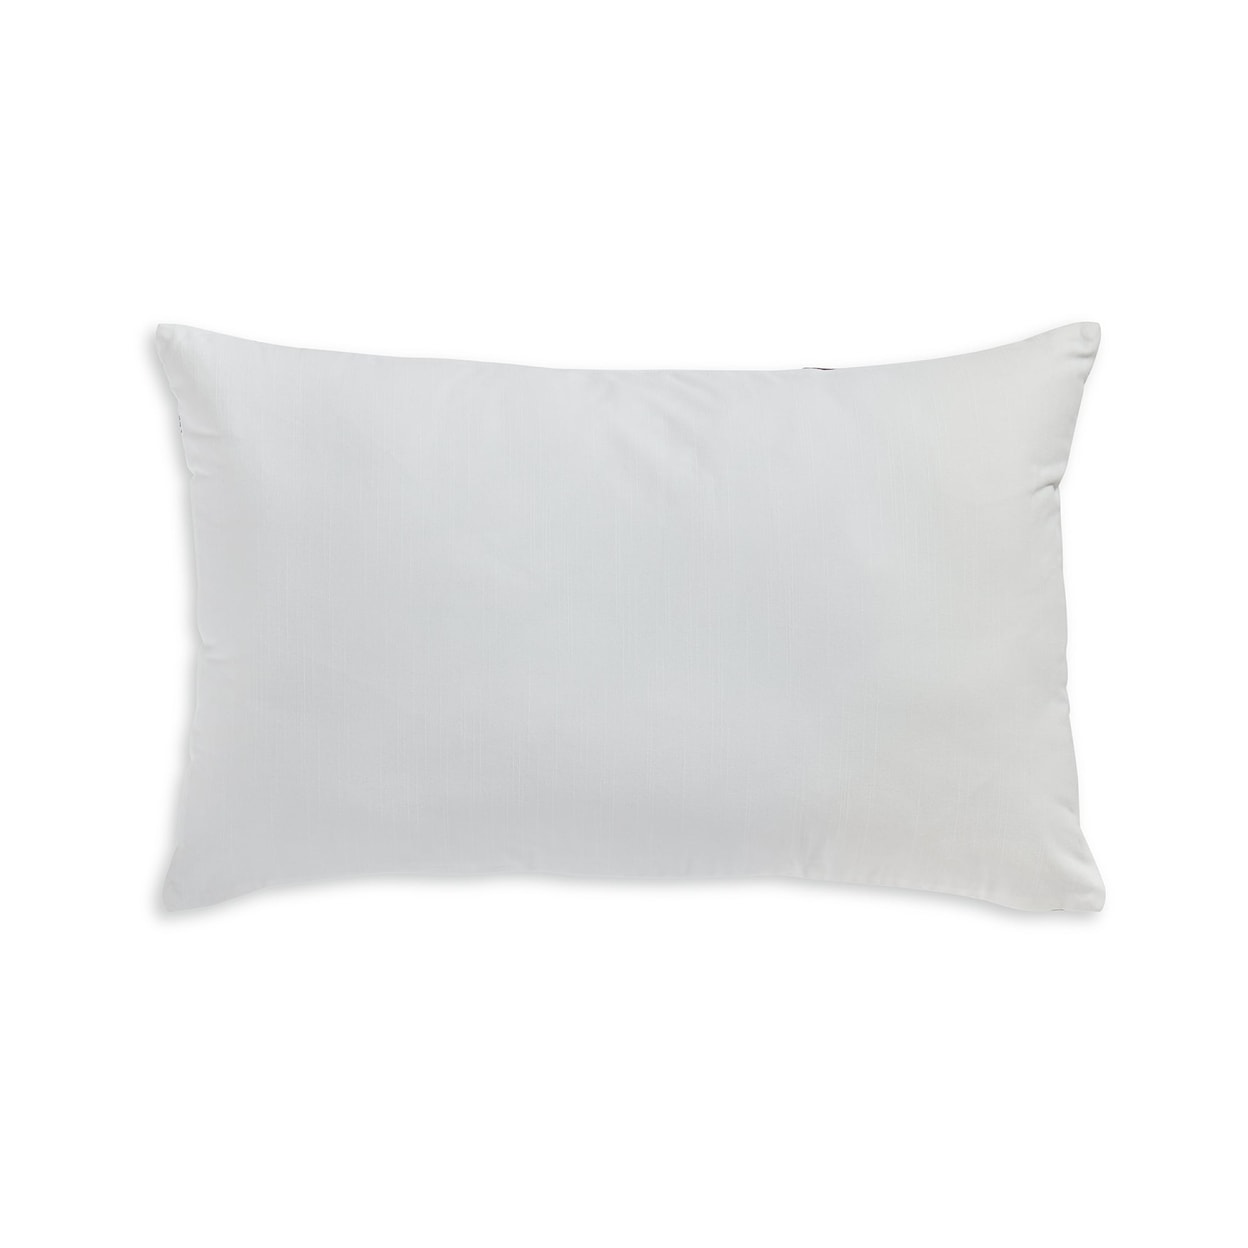 Benchcraft Lanston Accent Pillow (Set of 4)